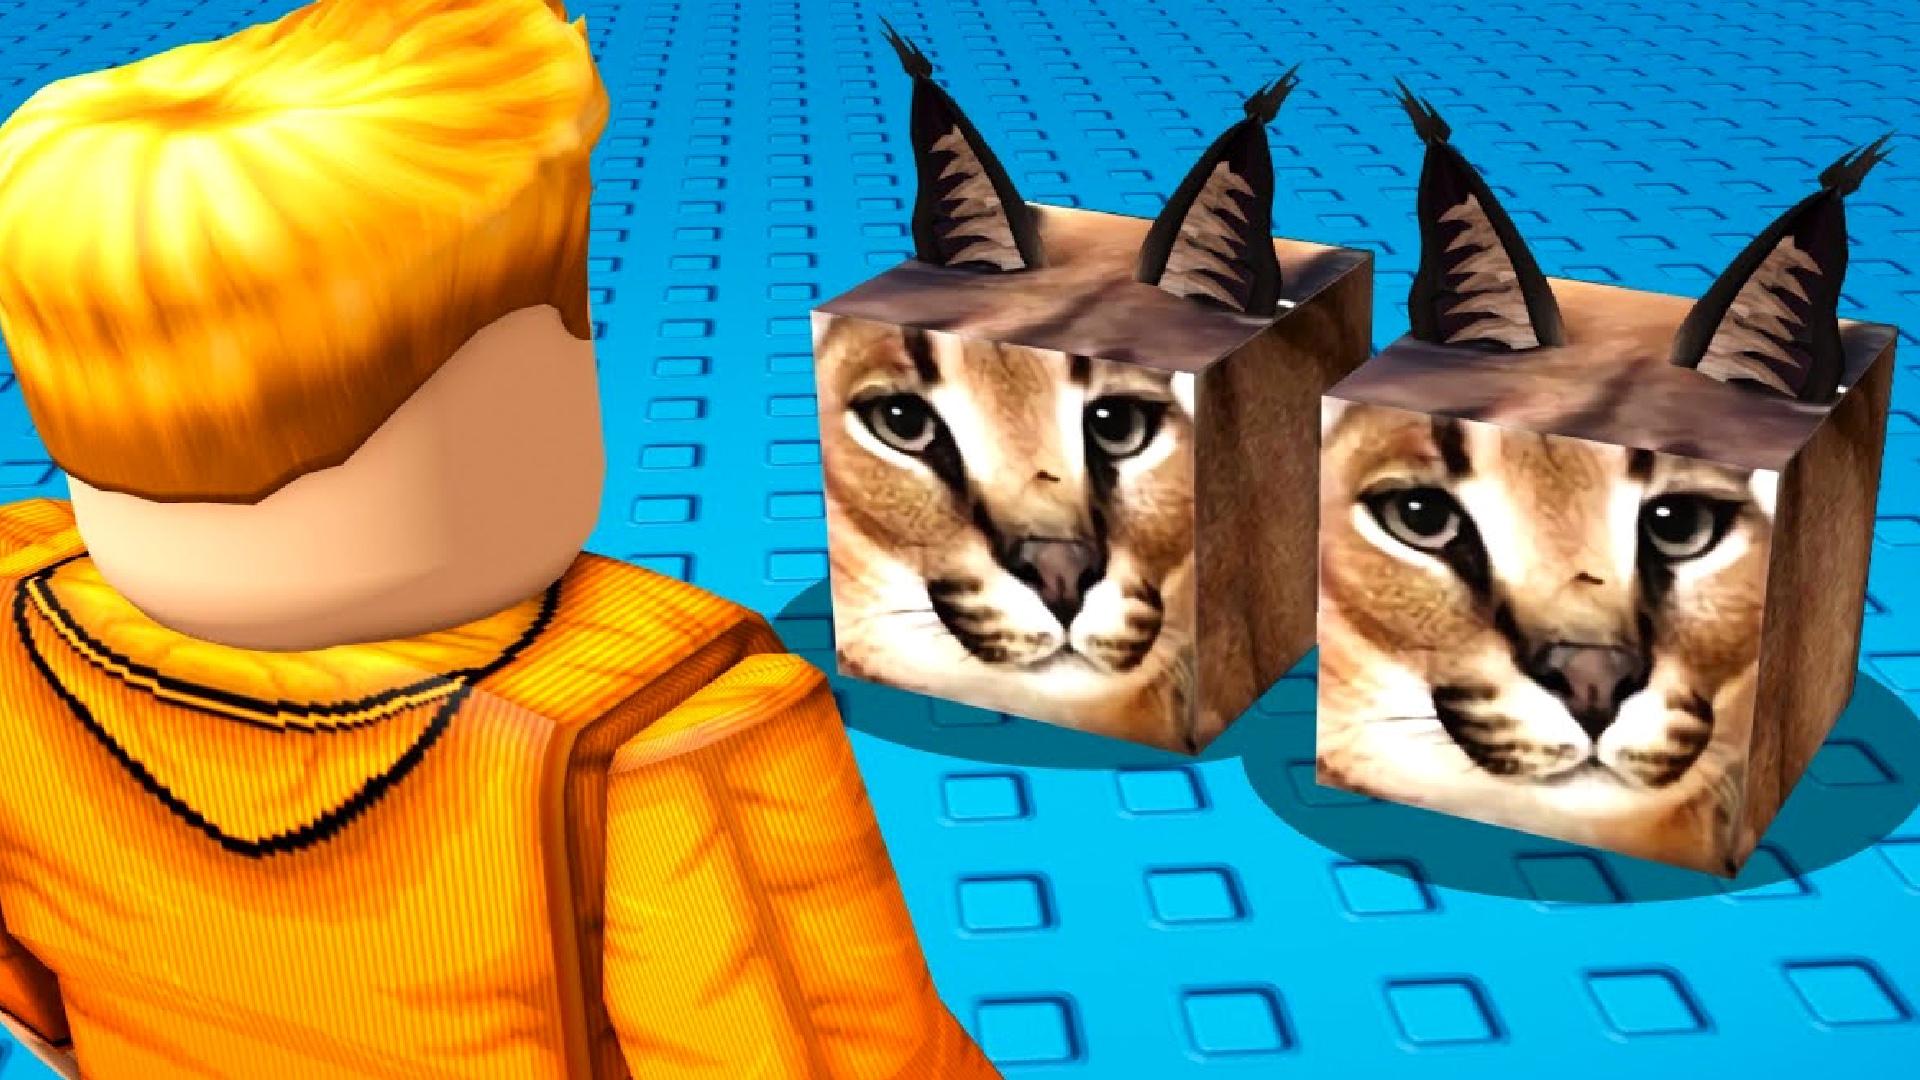 A Roblox image featuring big cats